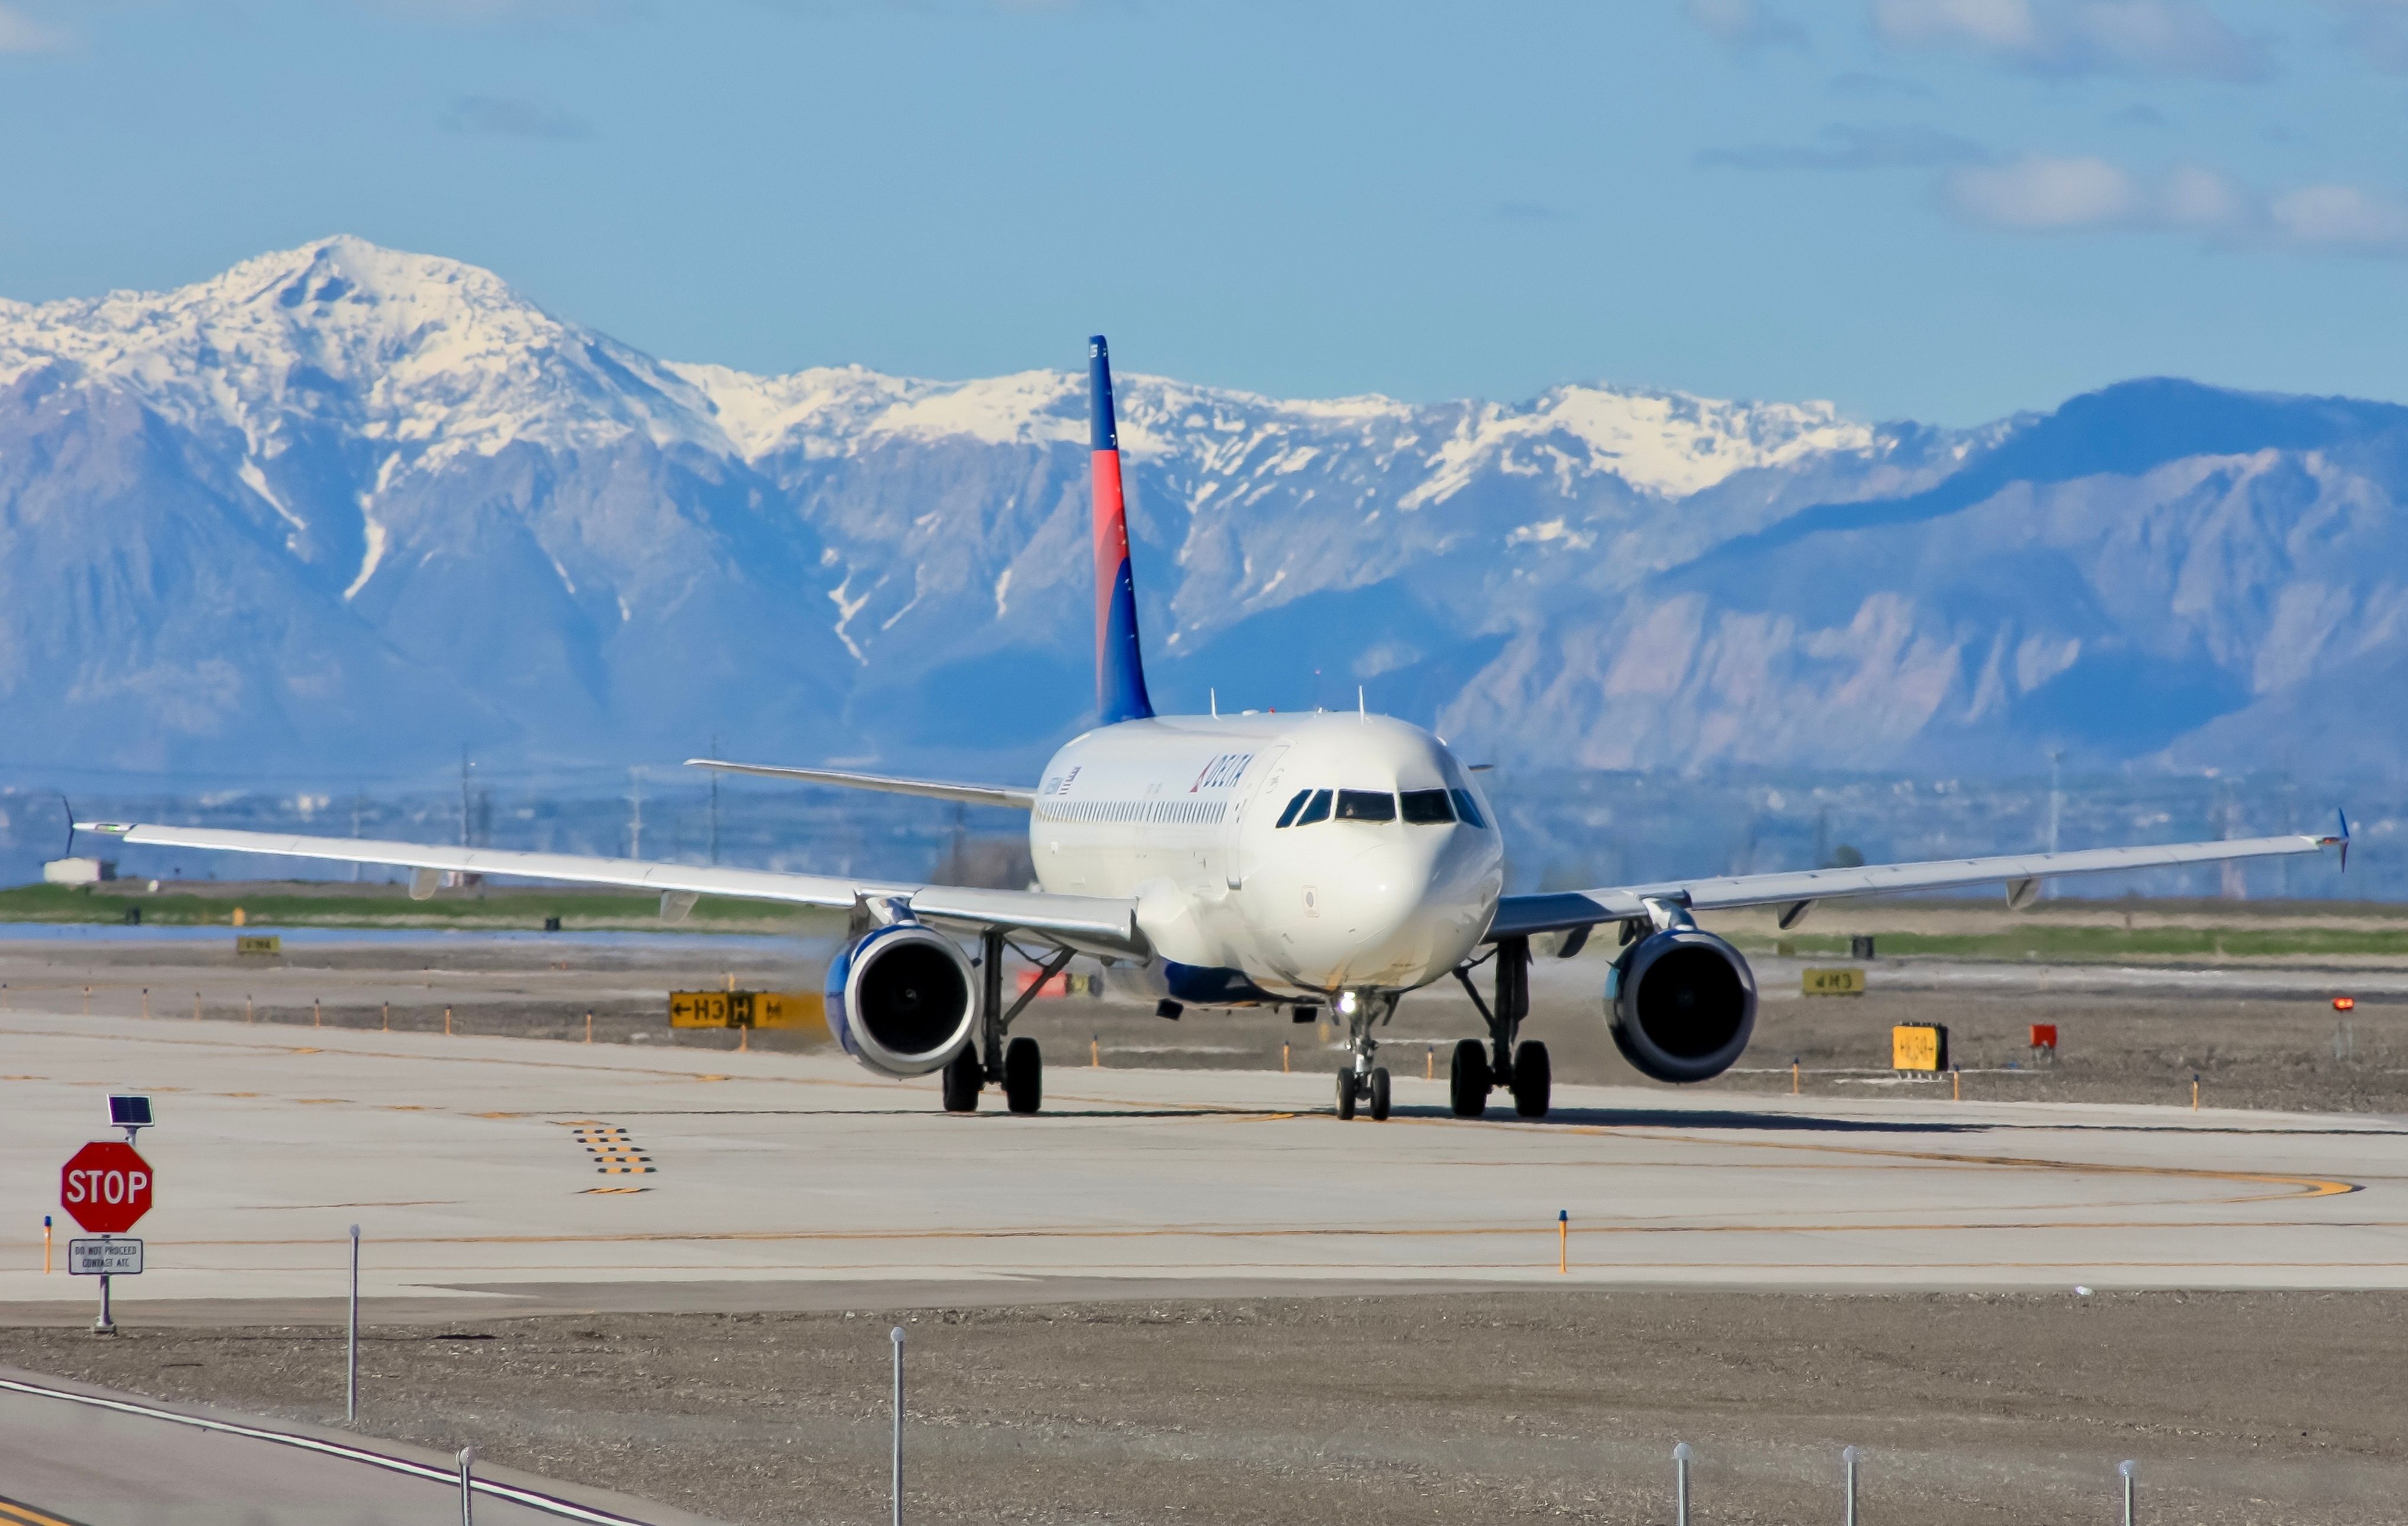 A Delta Air Lines Airbus A320 on an airport apron.